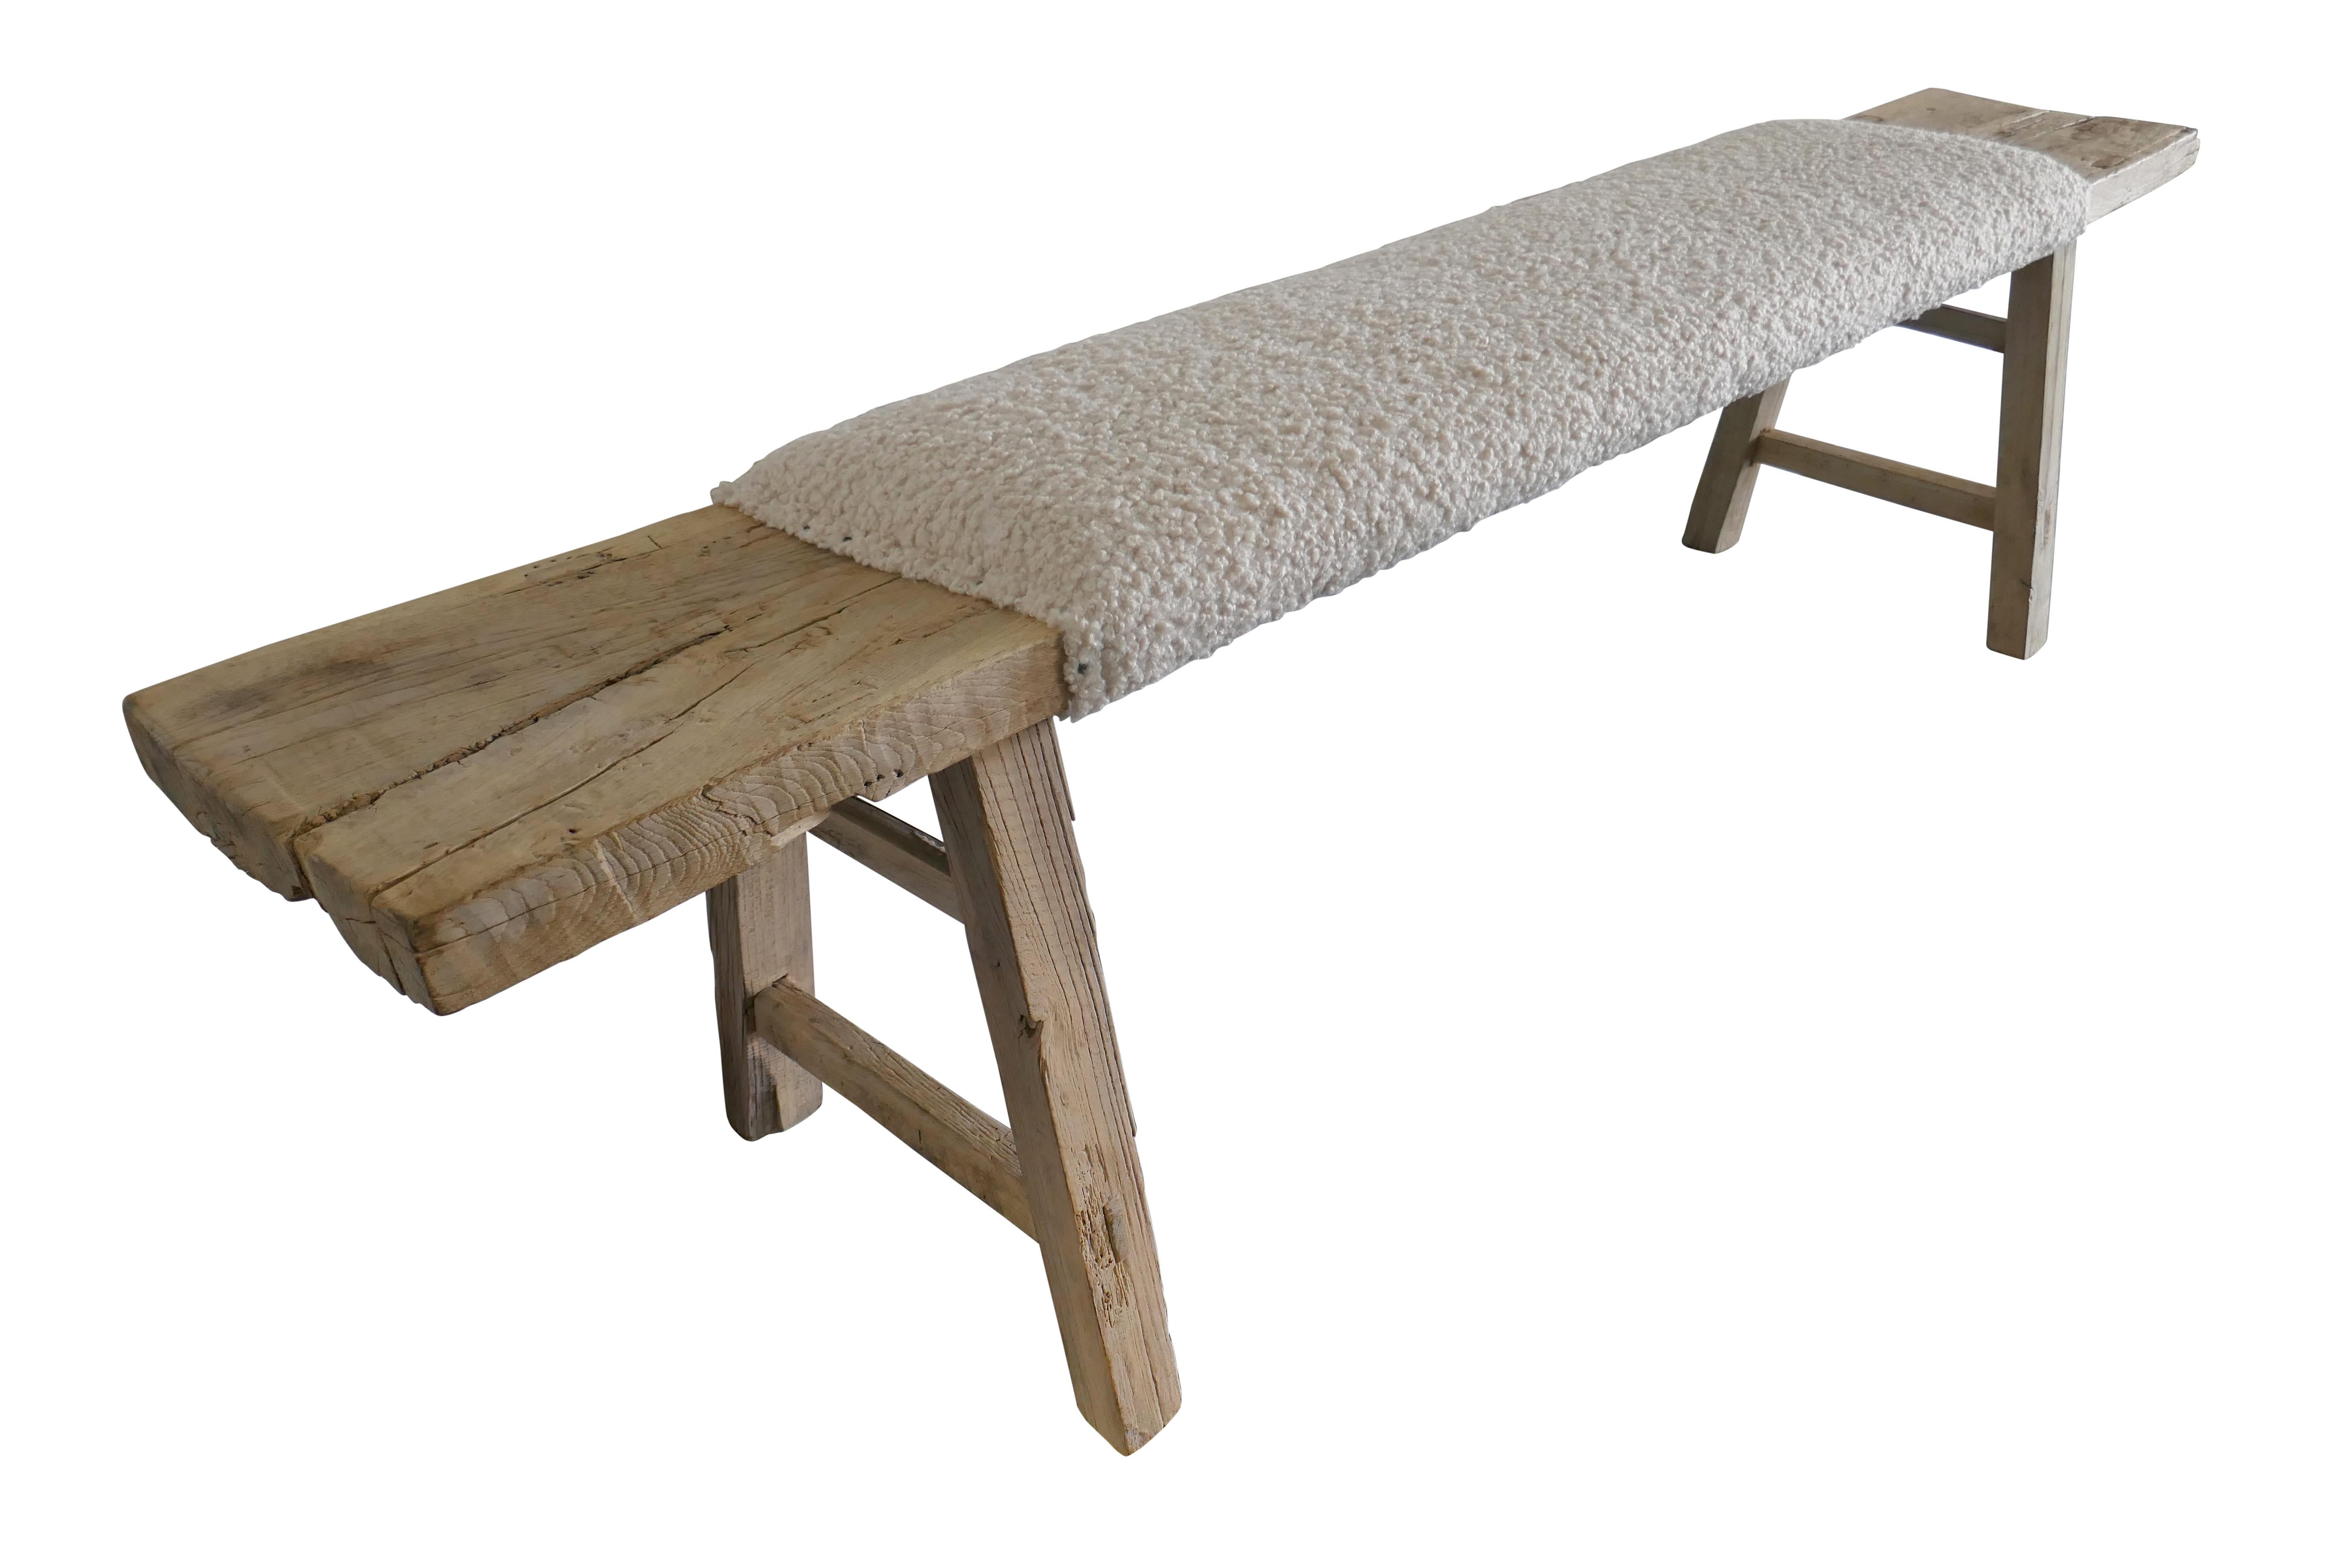 Our one-of-a-kind authentic vintage long Asian bench. Primitively hand-built of solid heavy raw natural elmwood. Constructed with early mortise & tenon joinery, displaying desirable age character throughout. Styled with sturdy splayed legs with